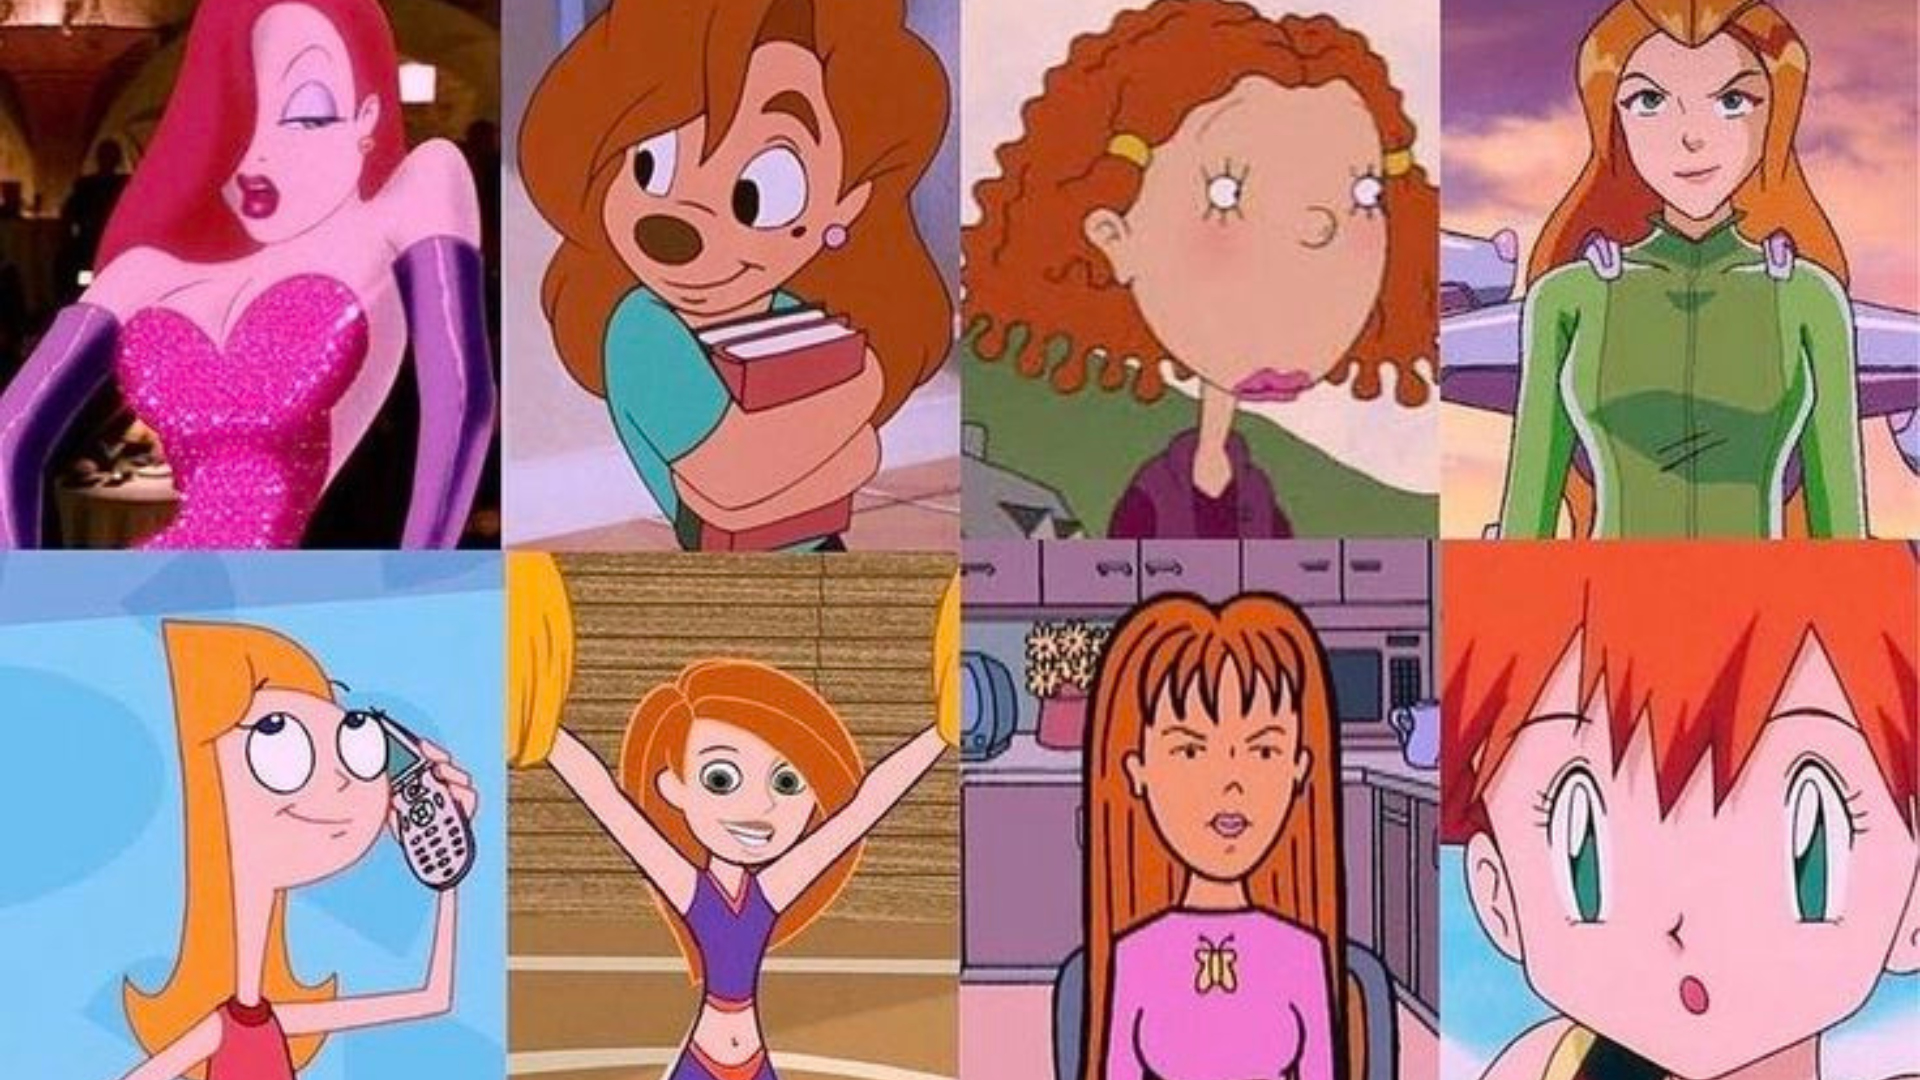 Opinion: Ariel Isn’t The Only Representation For Redhead Girls